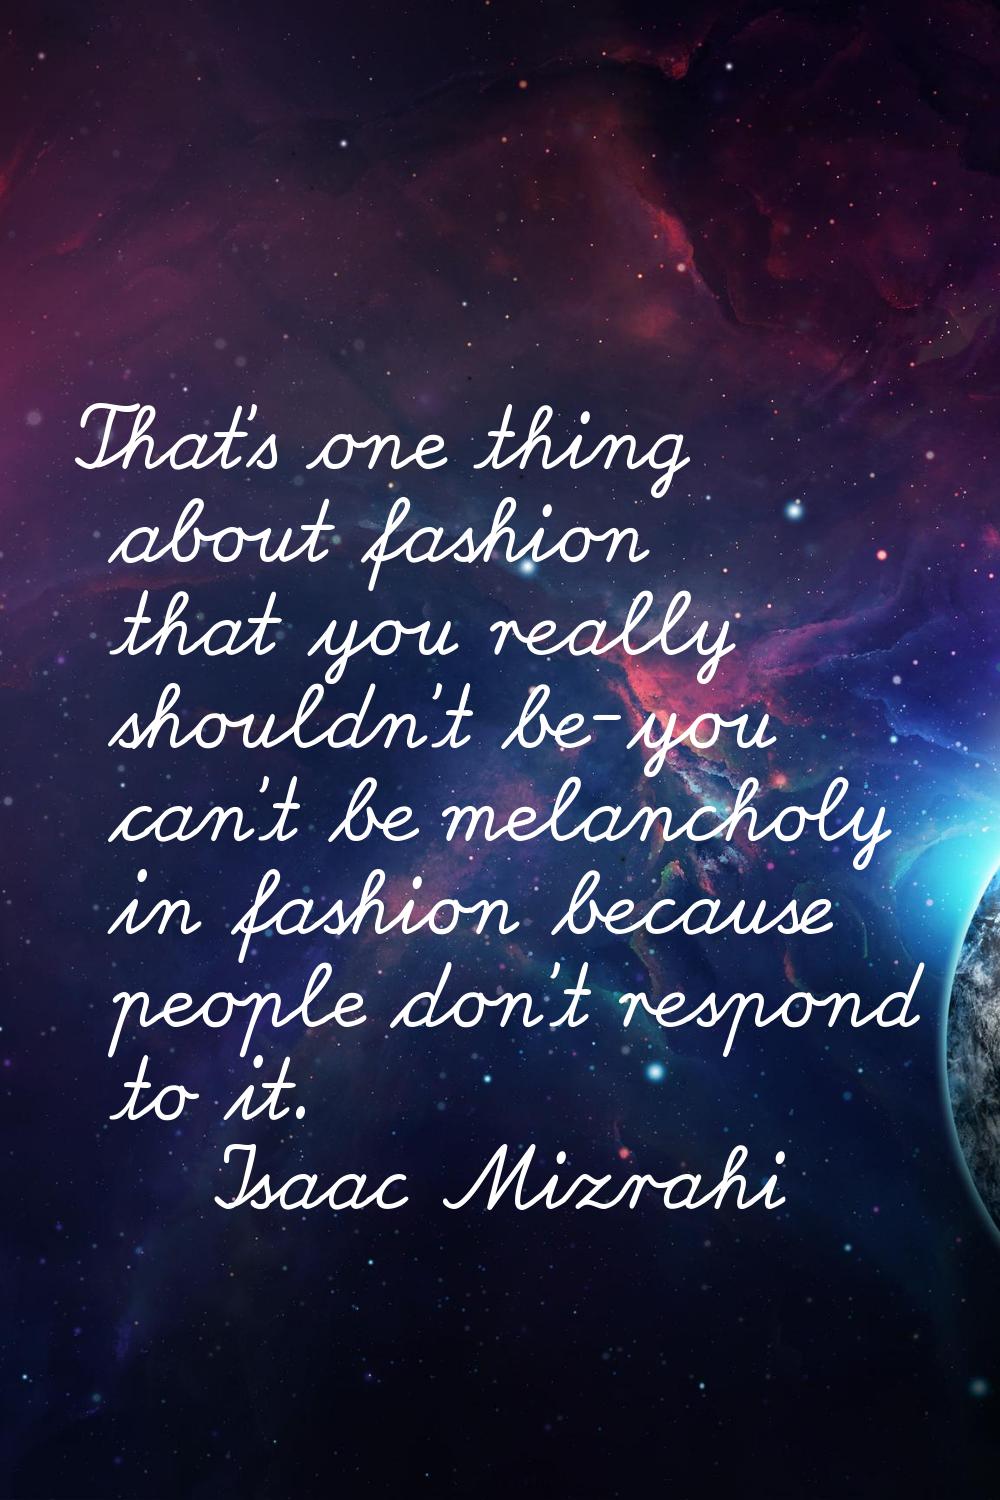 That's one thing about fashion that you really shouldn't be-you can't be melancholy in fashion beca